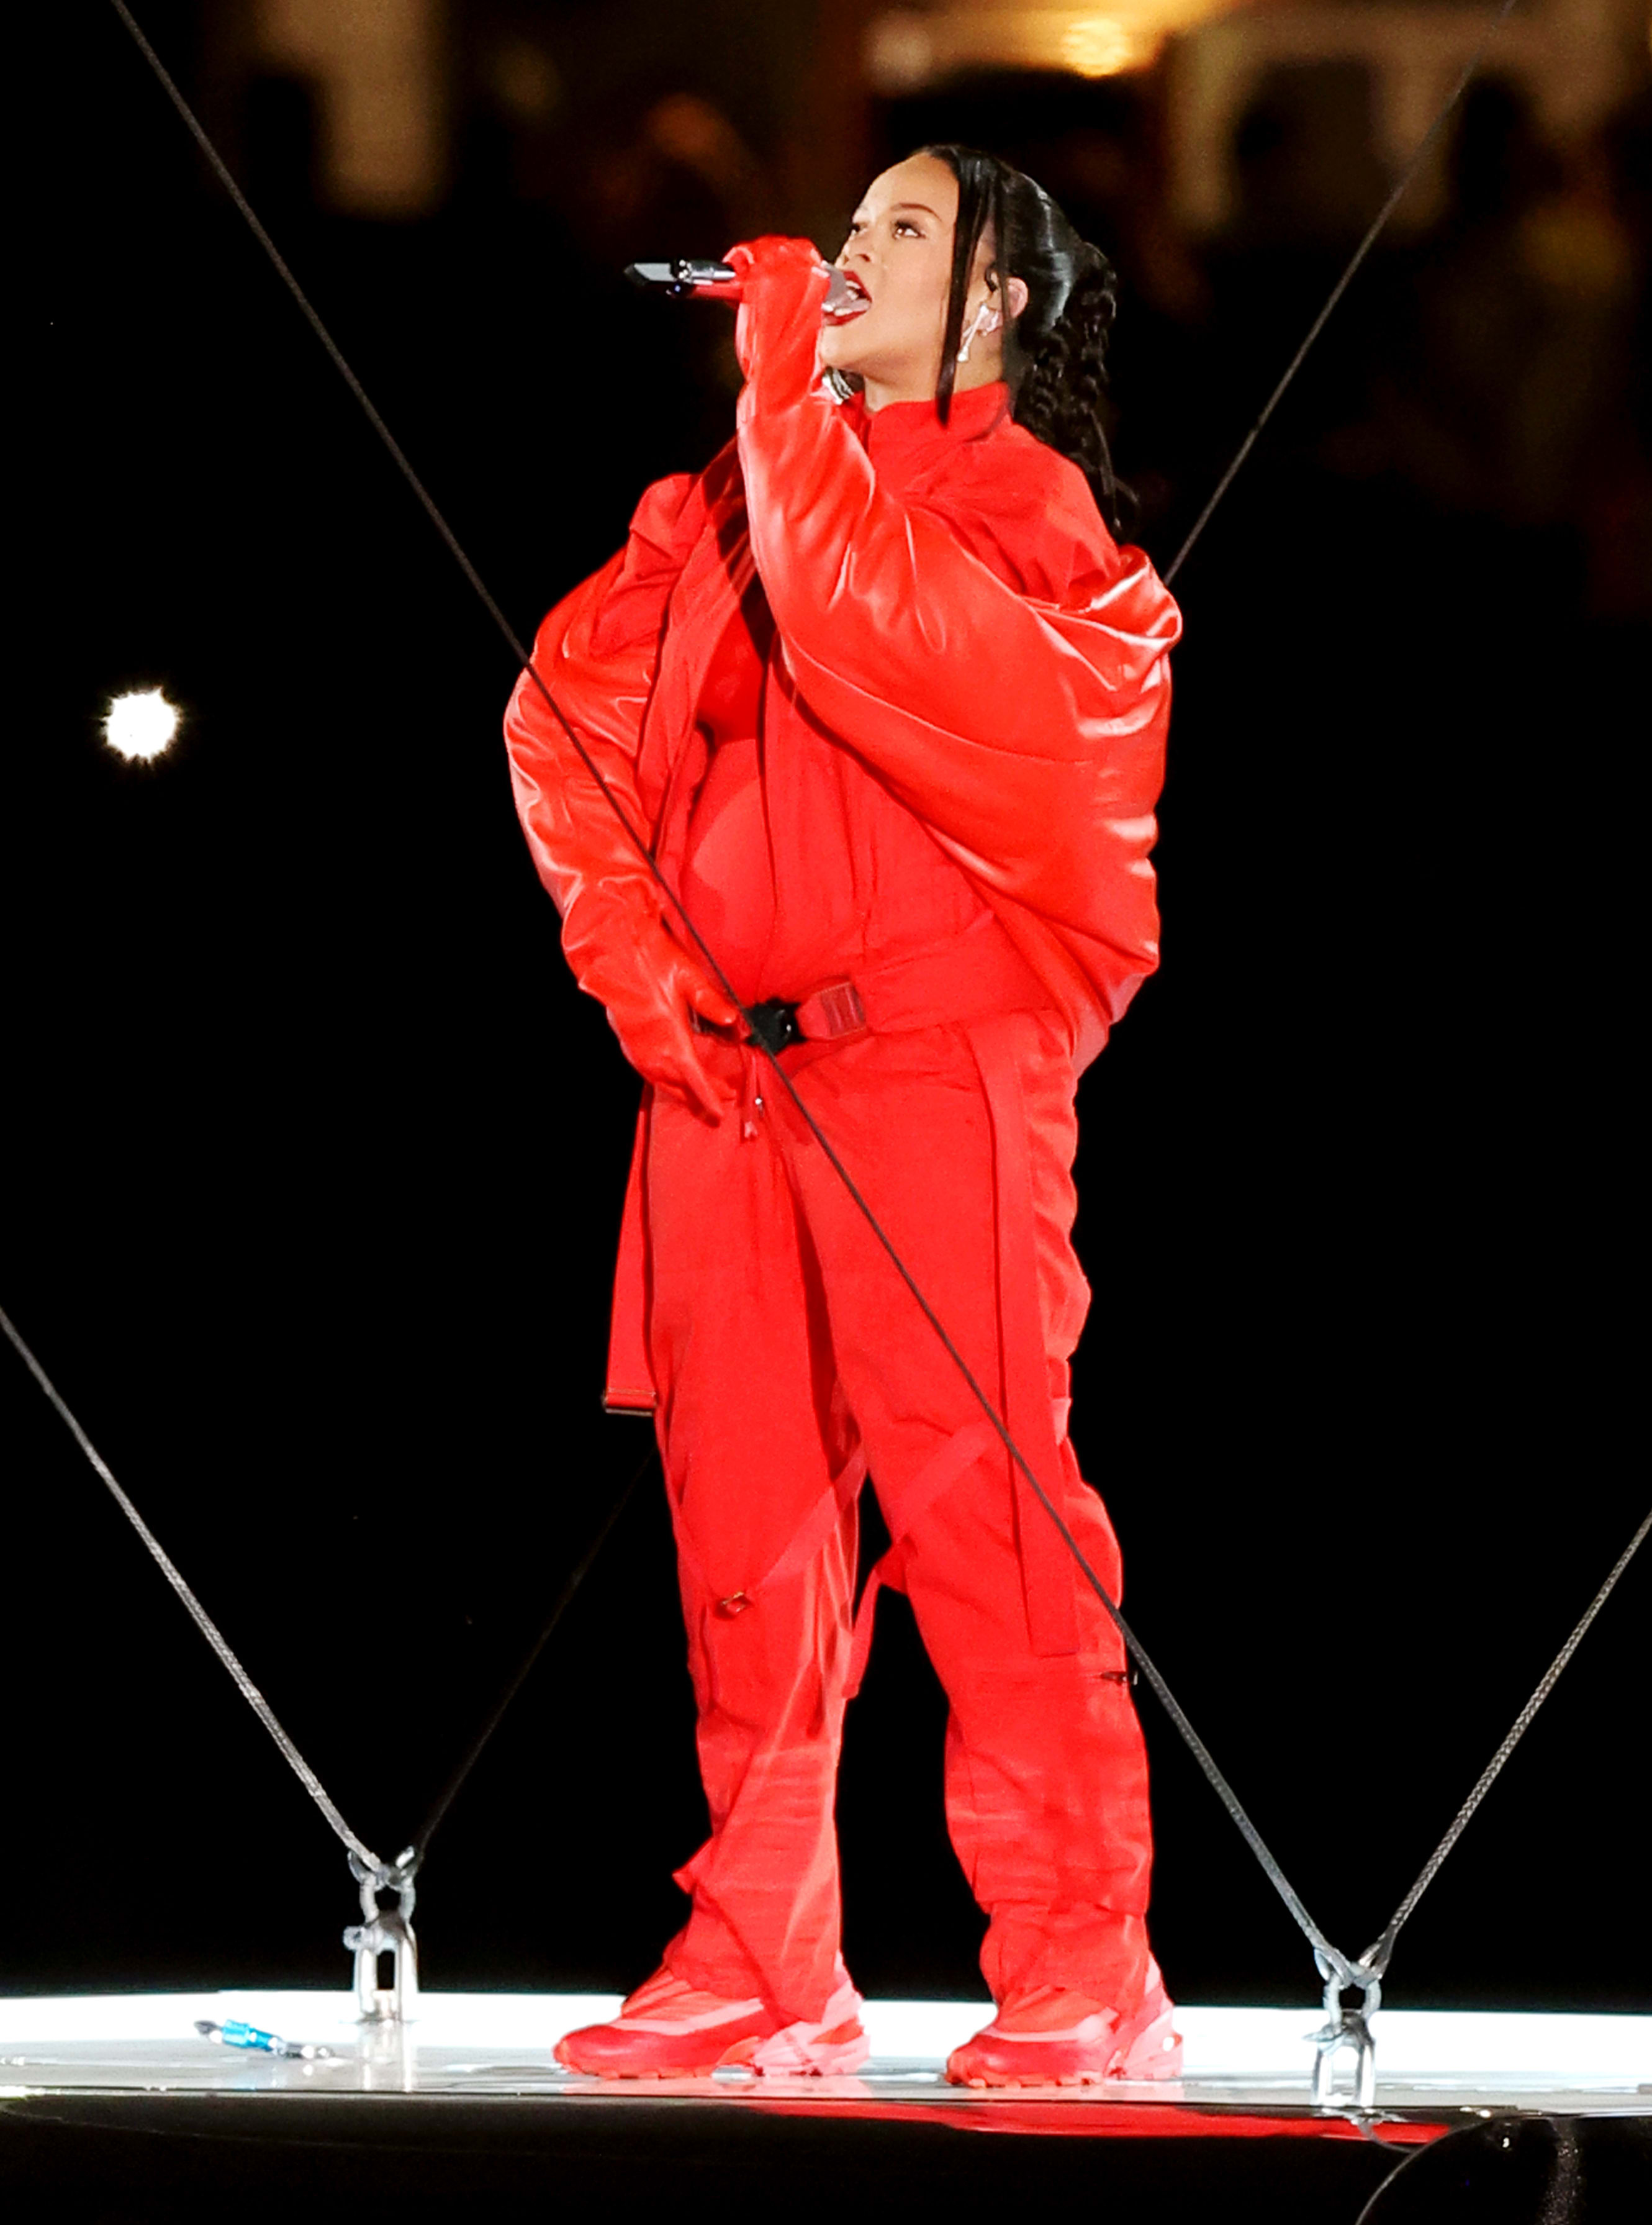 Rihanna Performs in Maison Margiela x Salomon Sneakers at the